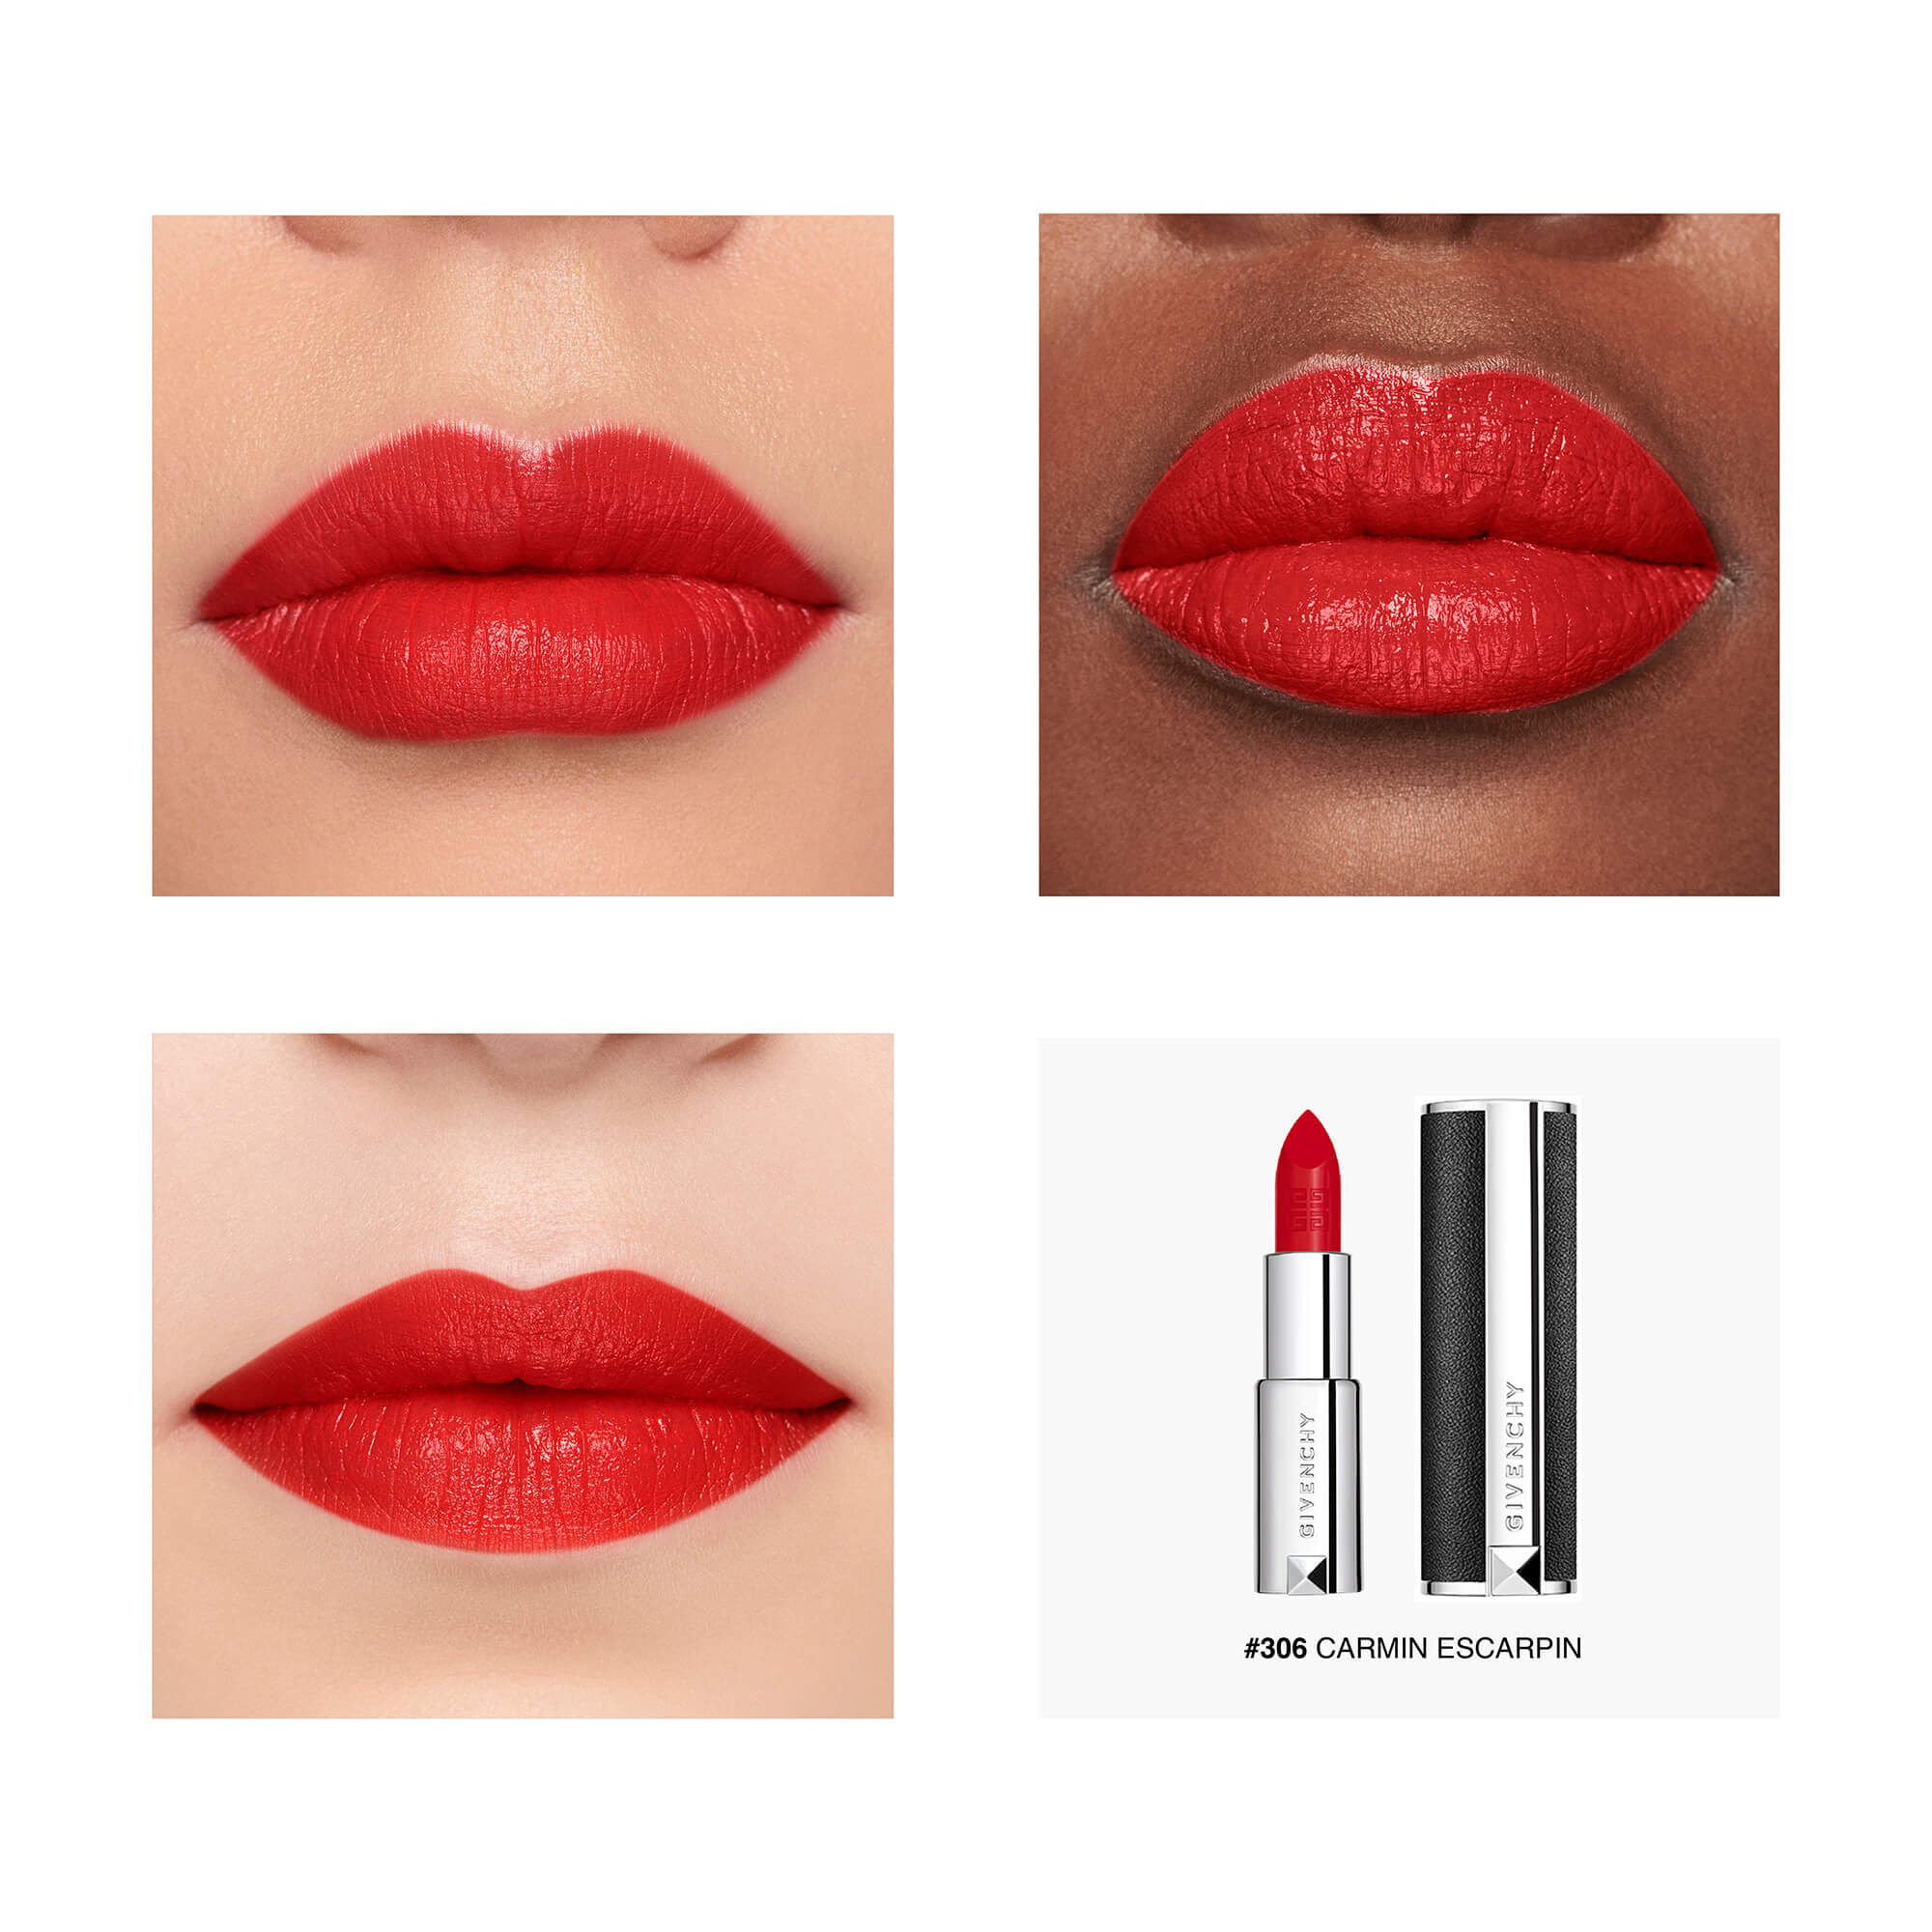 givenchy le rouge 307